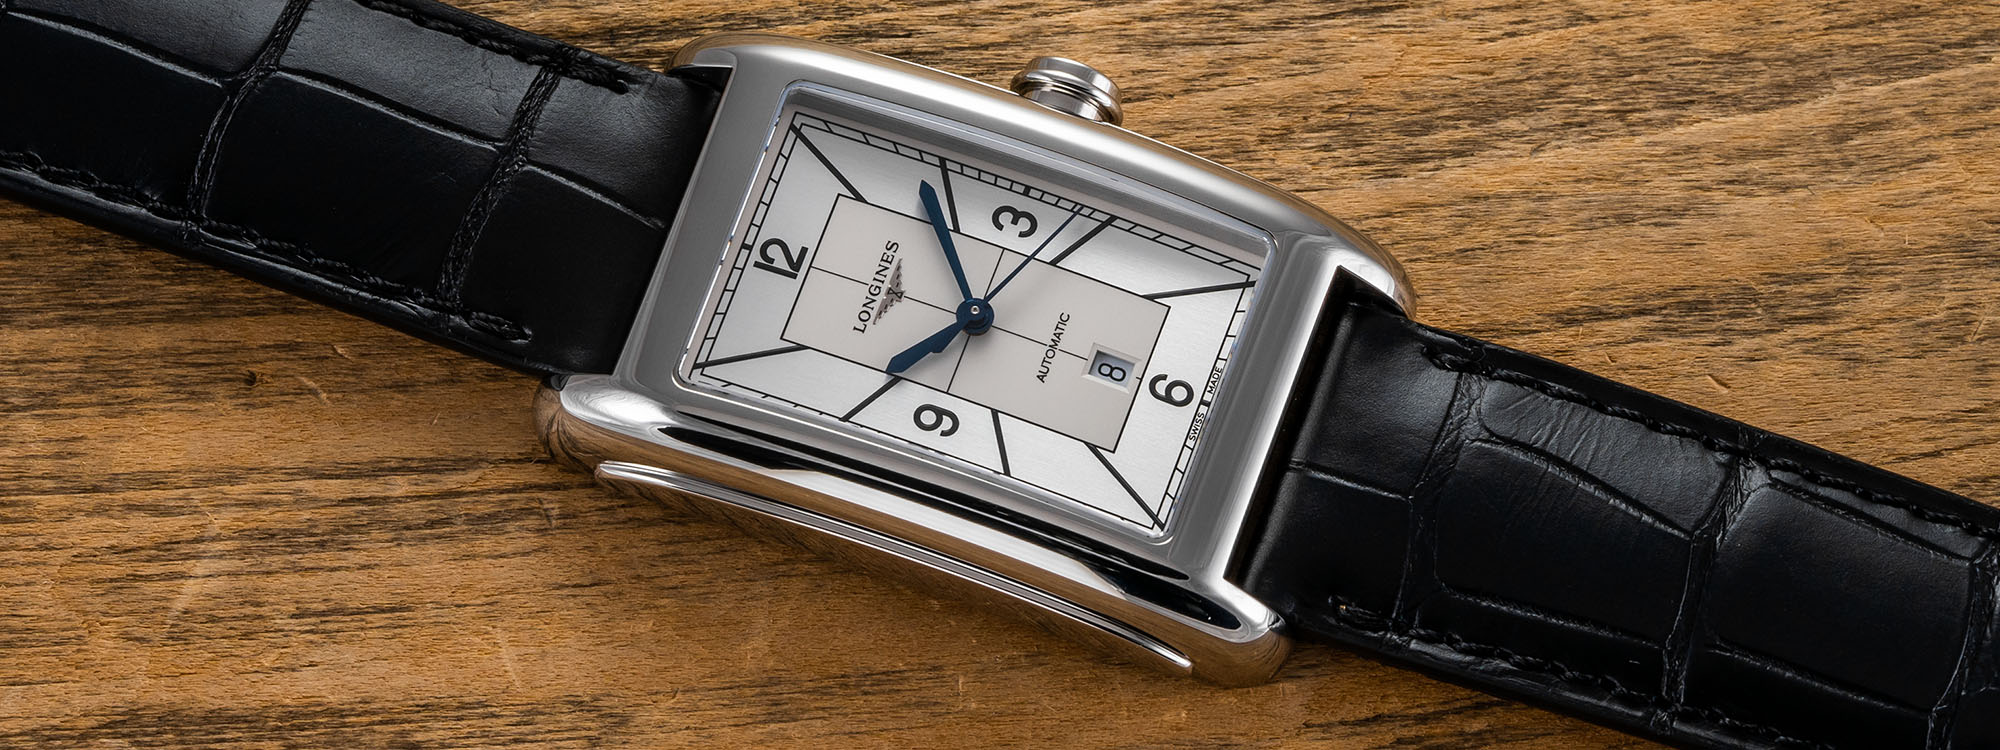 15 Important Parts of a Watch That Everyone Should Know